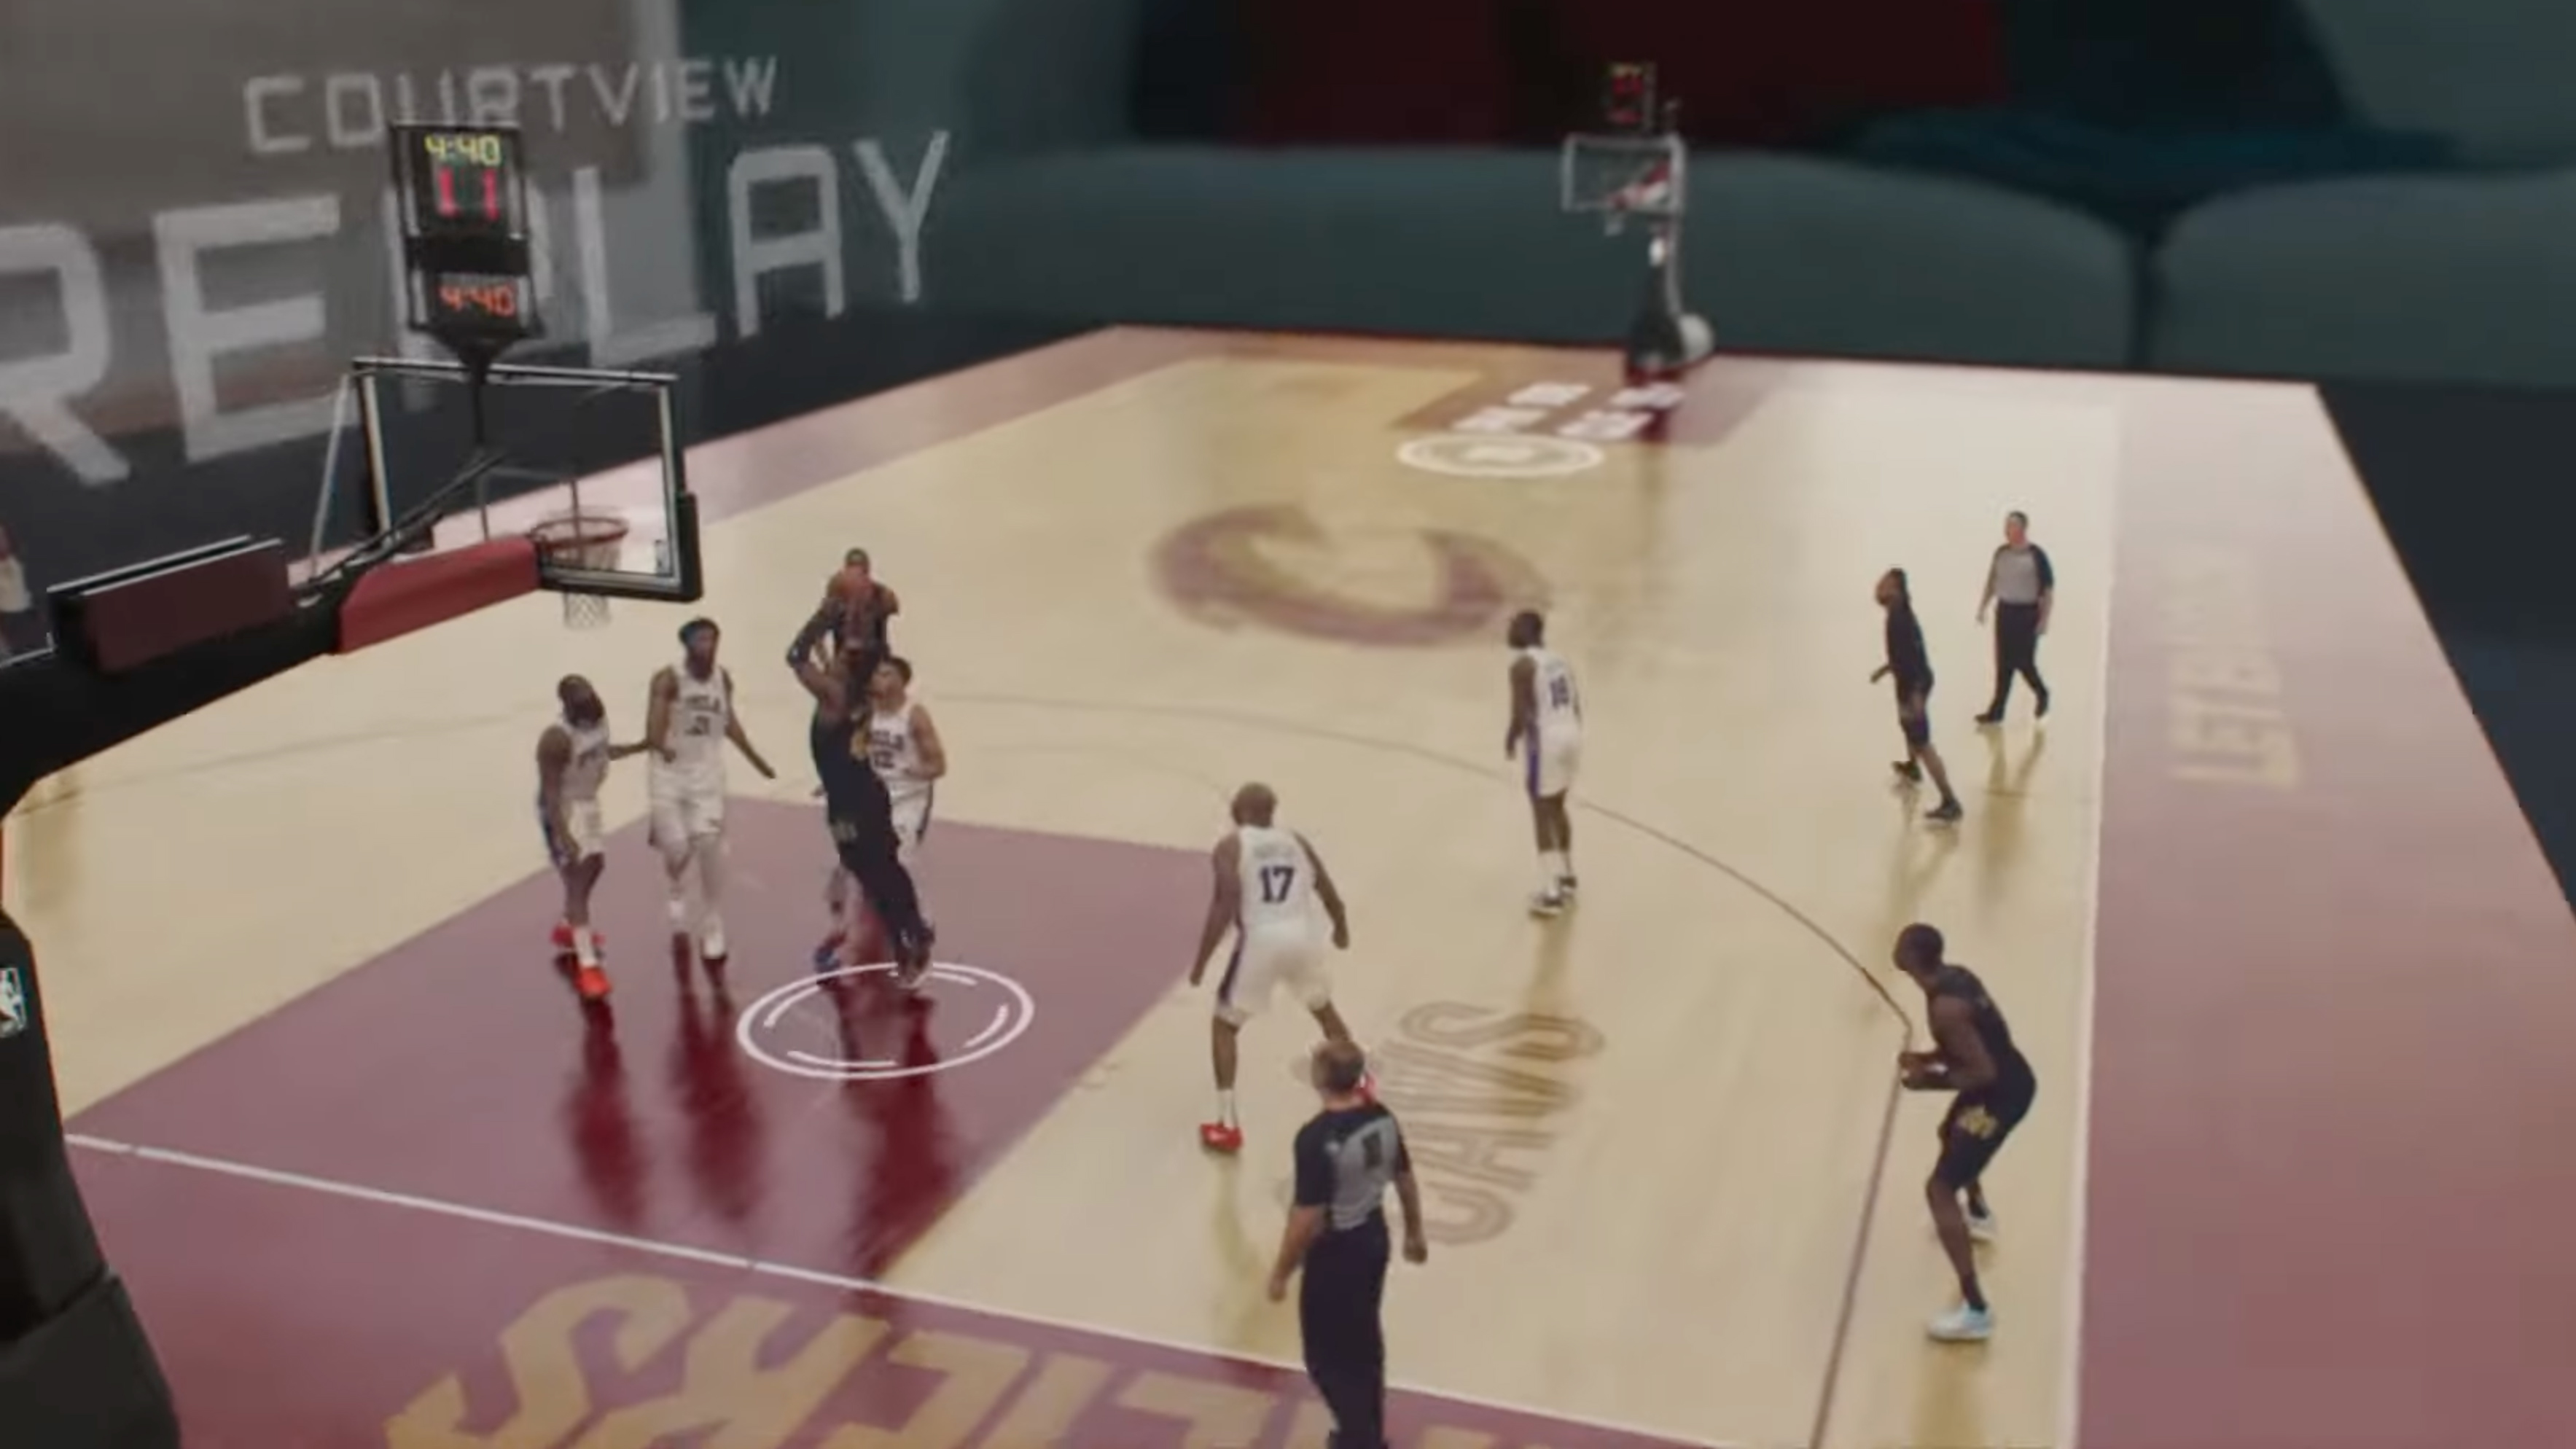 Basketball players playing on a virtual court in a living room